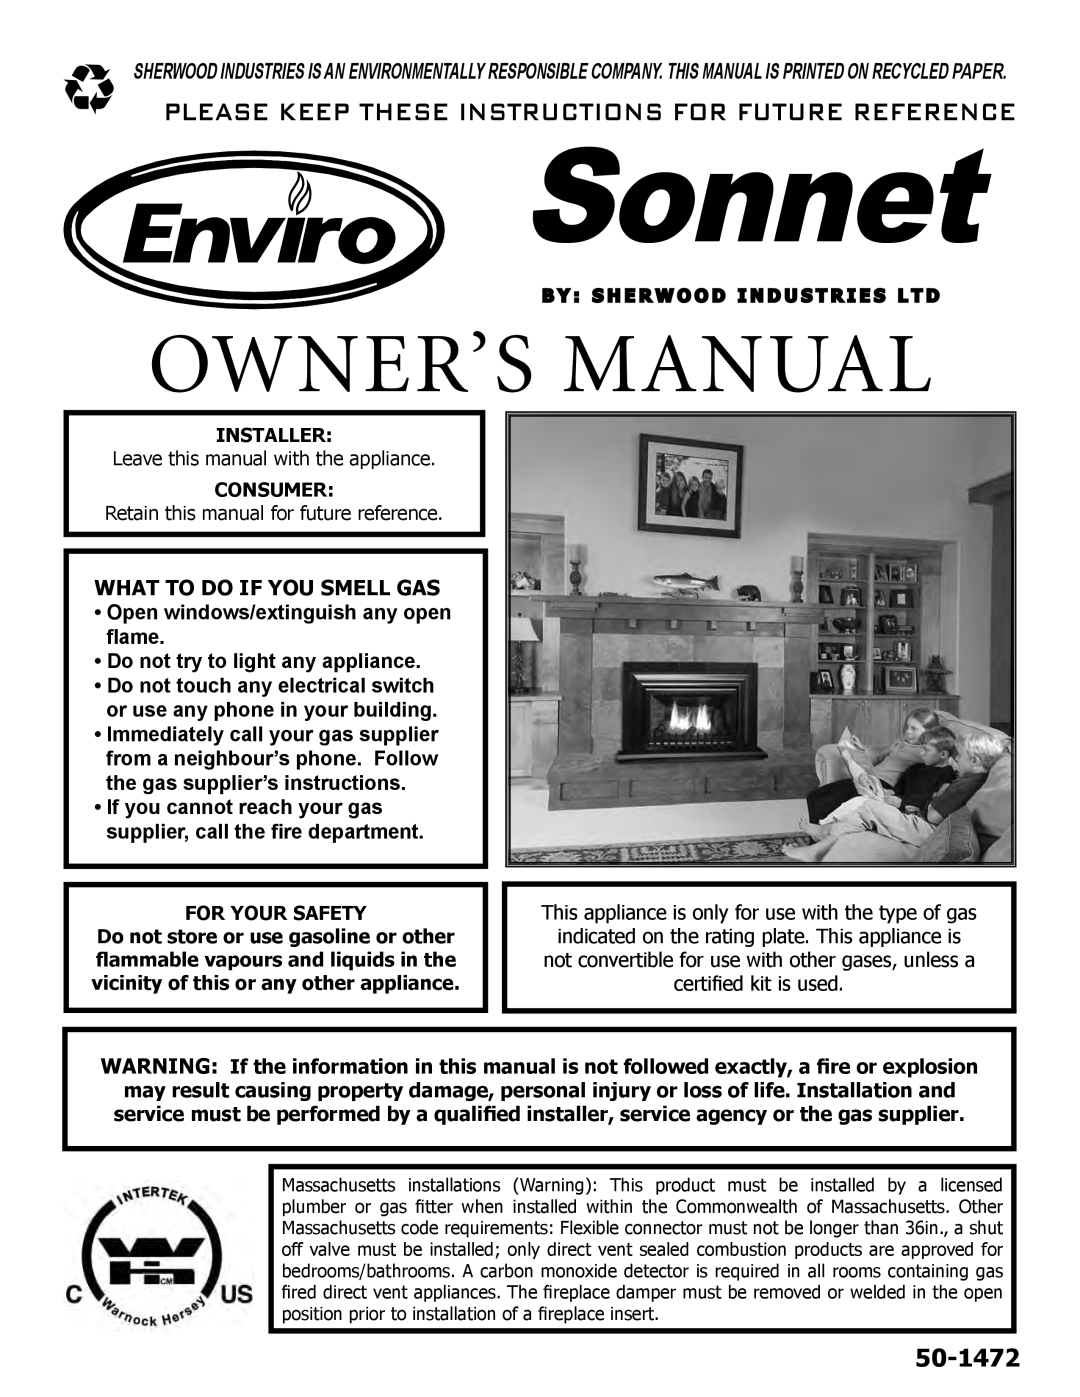 Enviro C-11102, C-11253 owner manual What To Do If You Smell Gas, Installer, Consumer, For Your Safety, Sonnet, 50-1472 